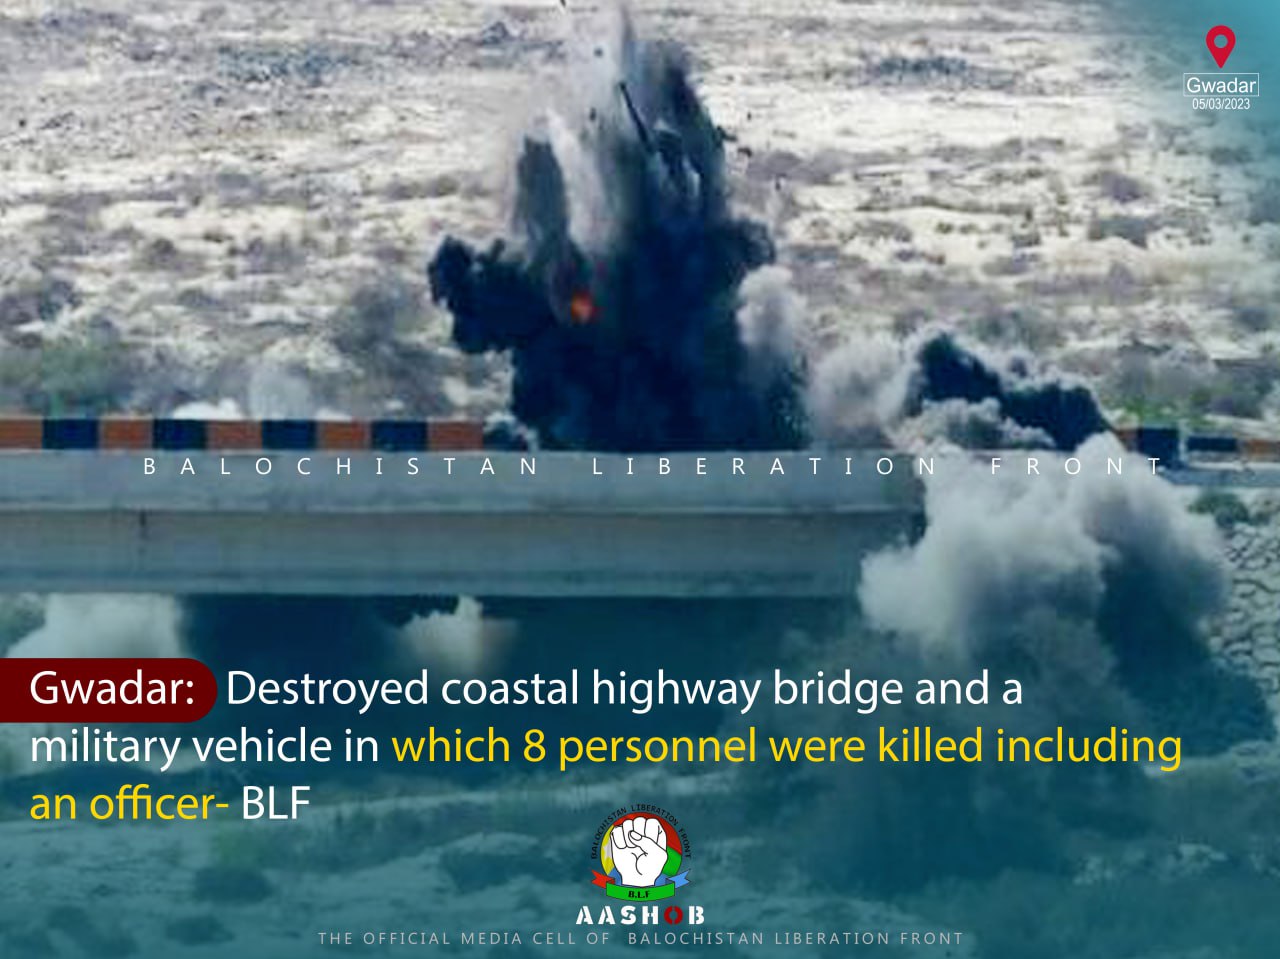 Balochistan Liberation Front (BLF) IED Attack Destroyed Coastal Highway and Military Convoy Killed 08 on China-Pakistan Economic Corridor (CPEC) Highway in Gwadar, Balochistan, Pakistan